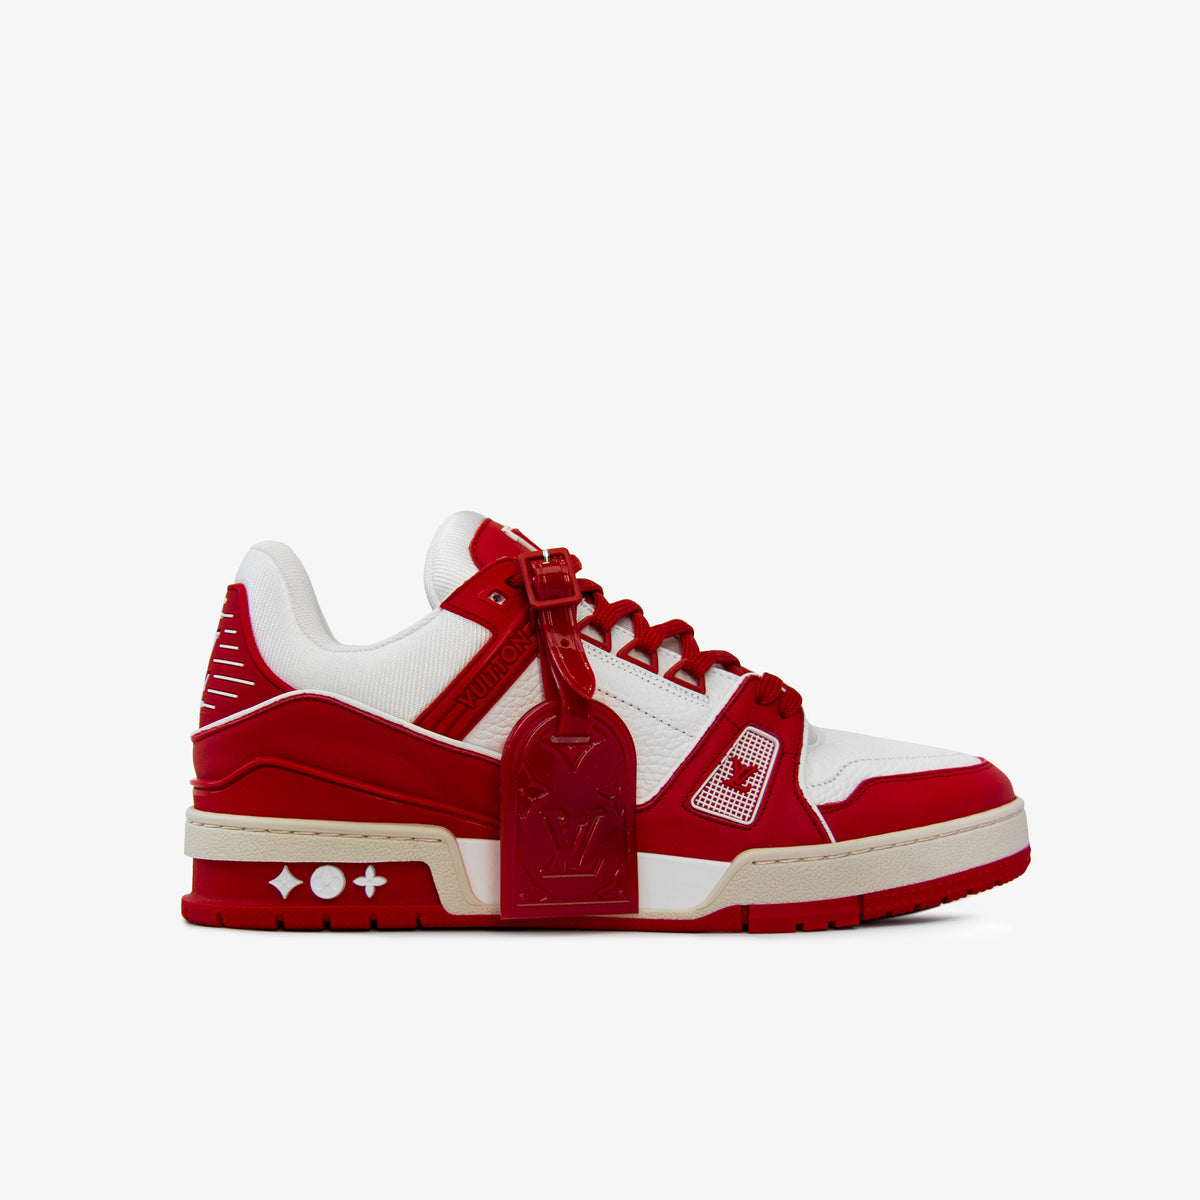 TRAINER SNEAKER (PRODUCT)RED – OBTAIND